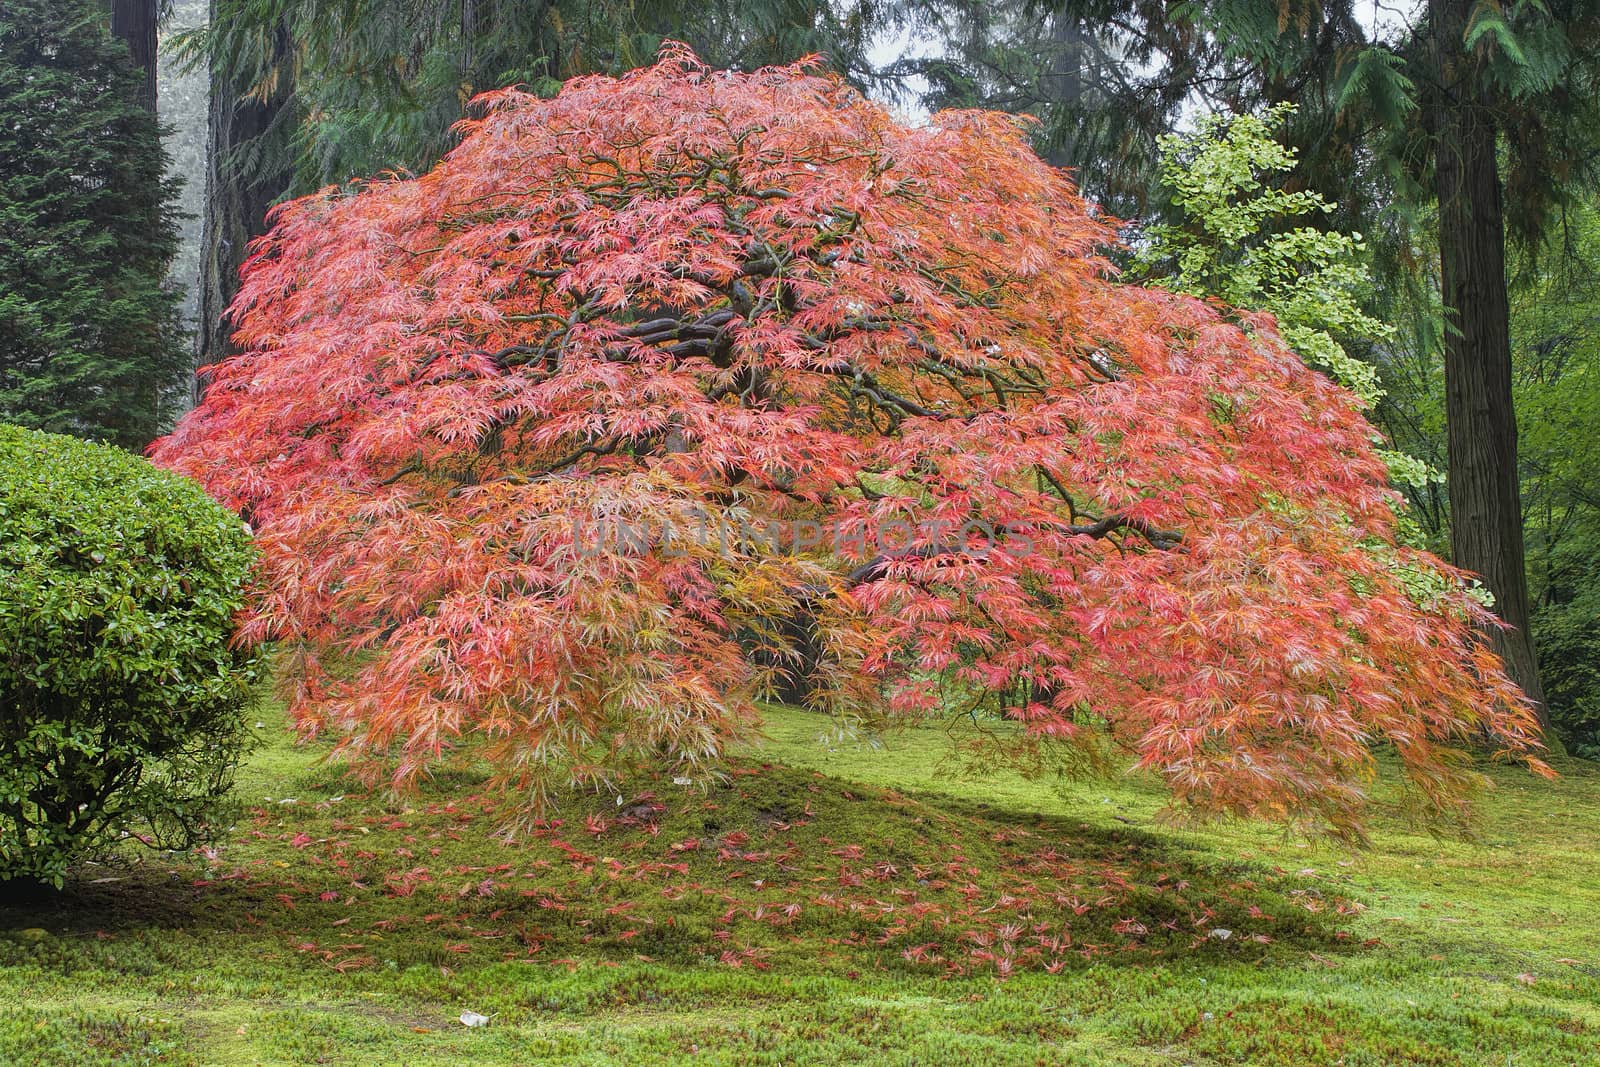 Old Japanese Laced Leaf Red Maple Tree in Autumn Season with Green Moss